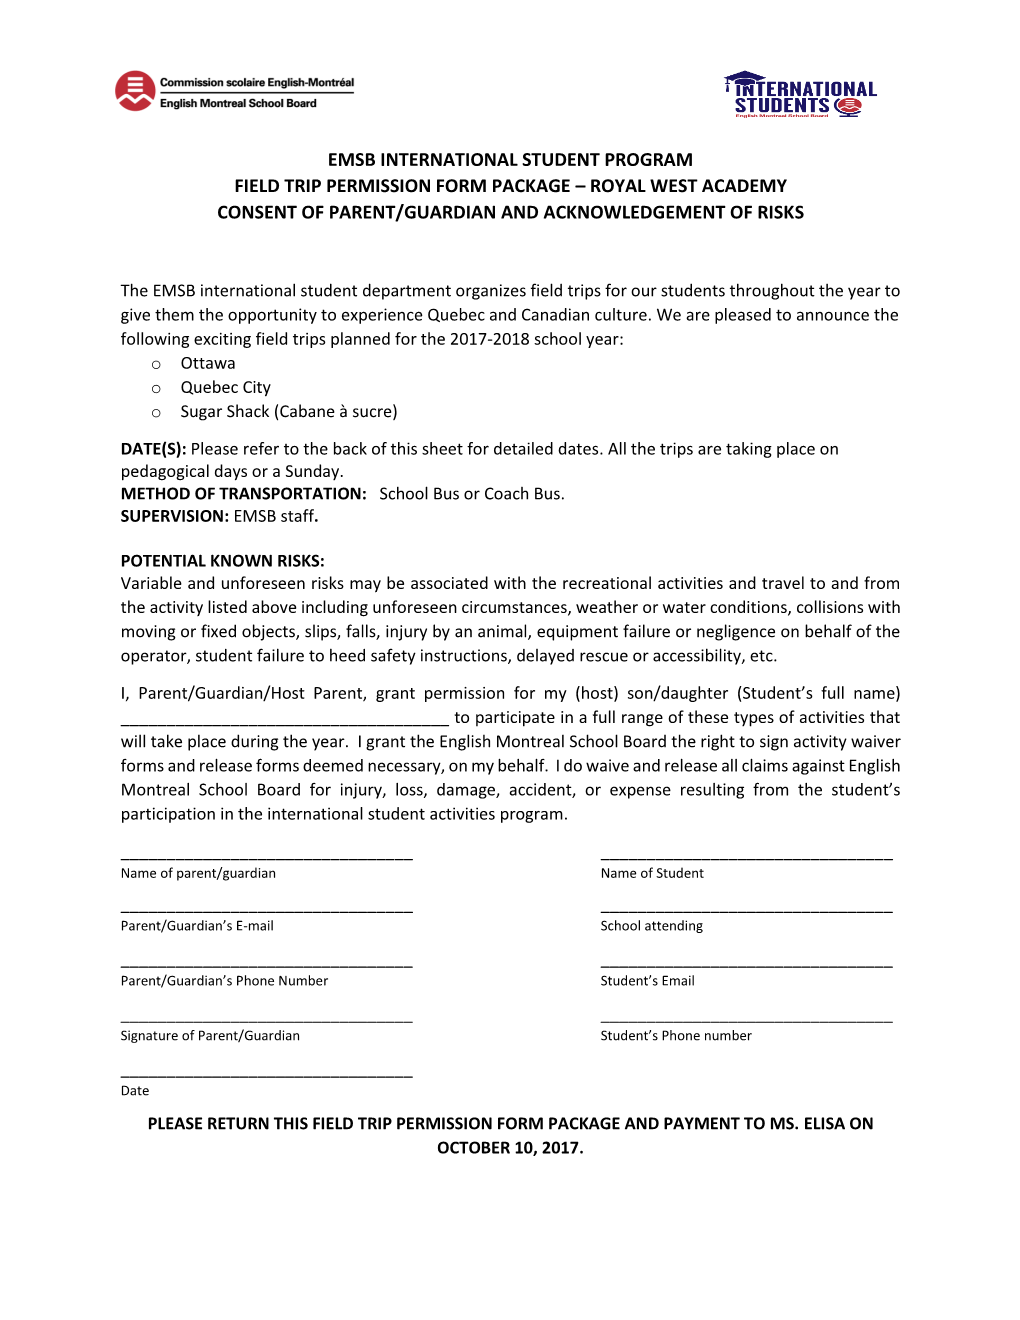 Emsb International Student Program Field Trip Permission Form Package – Royal West Academy Consent of Parent/Guardian and Acknowledgement of Risks